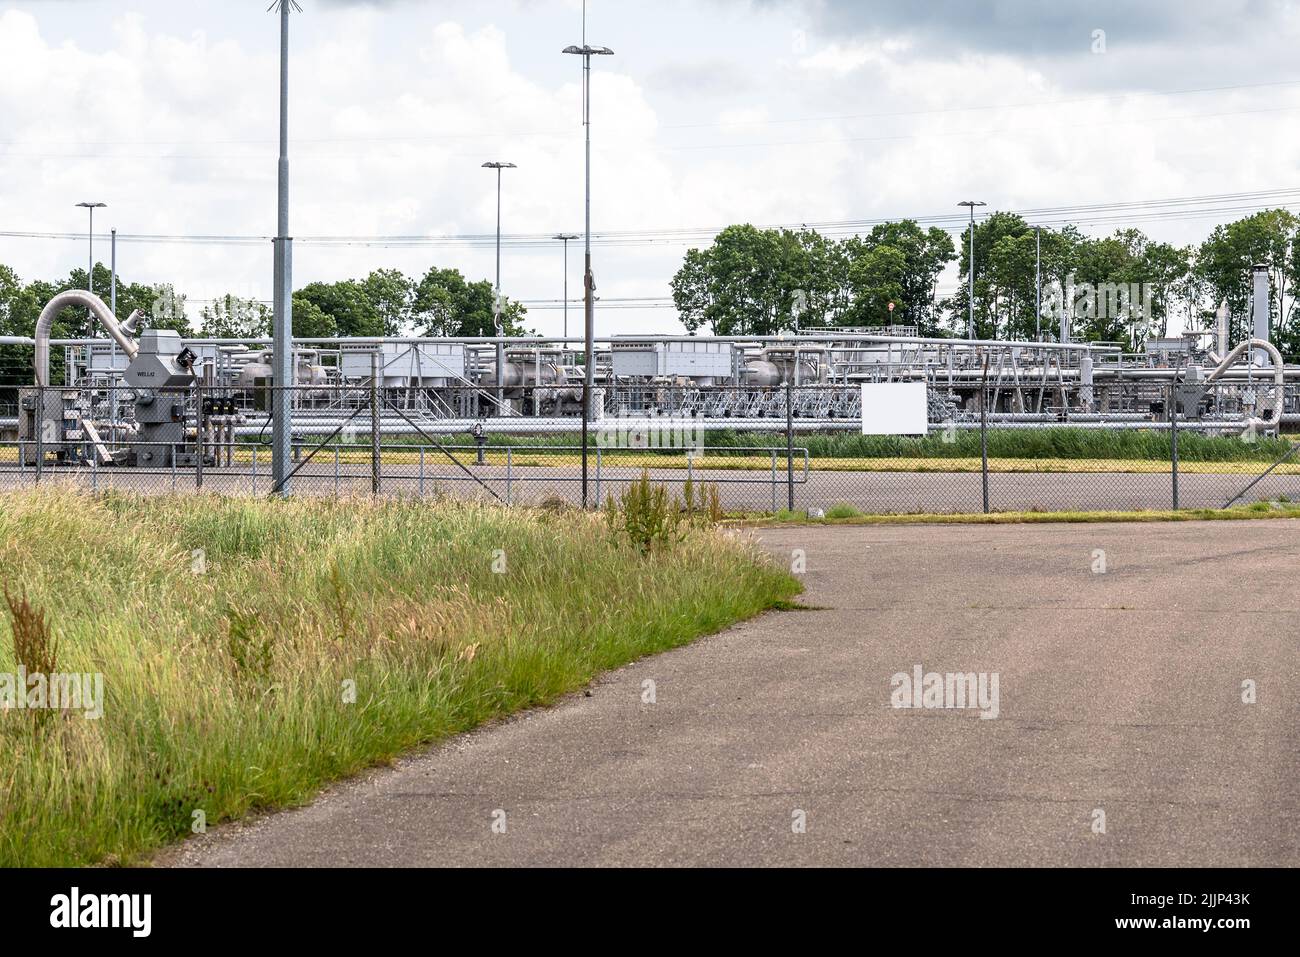 Wellheads and pipelines at a natural gas extraction site in the countryside. Groningen gas field. Stock Photo